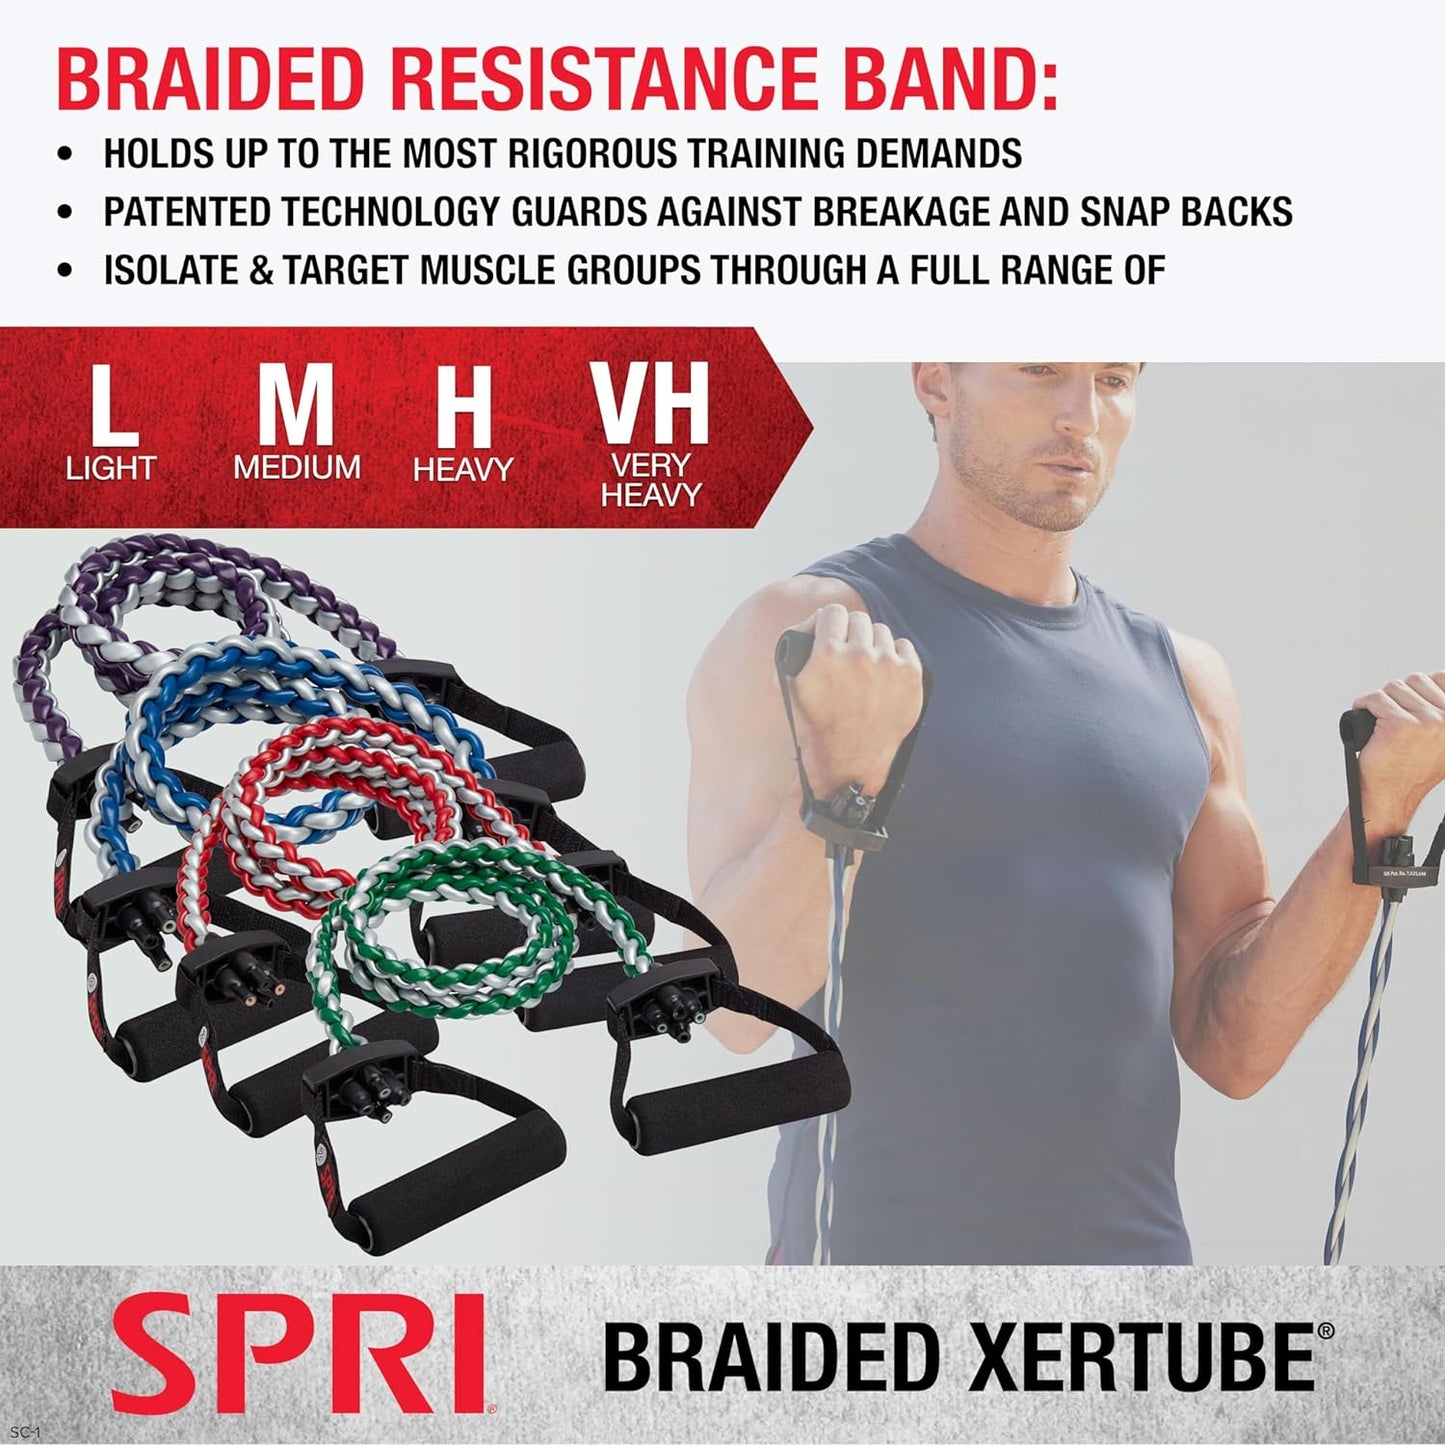 "Enhance Fitness and Sculpt Your Body with Braided Xertube Resistance Bands – Select Your Desired Resistance Level!"